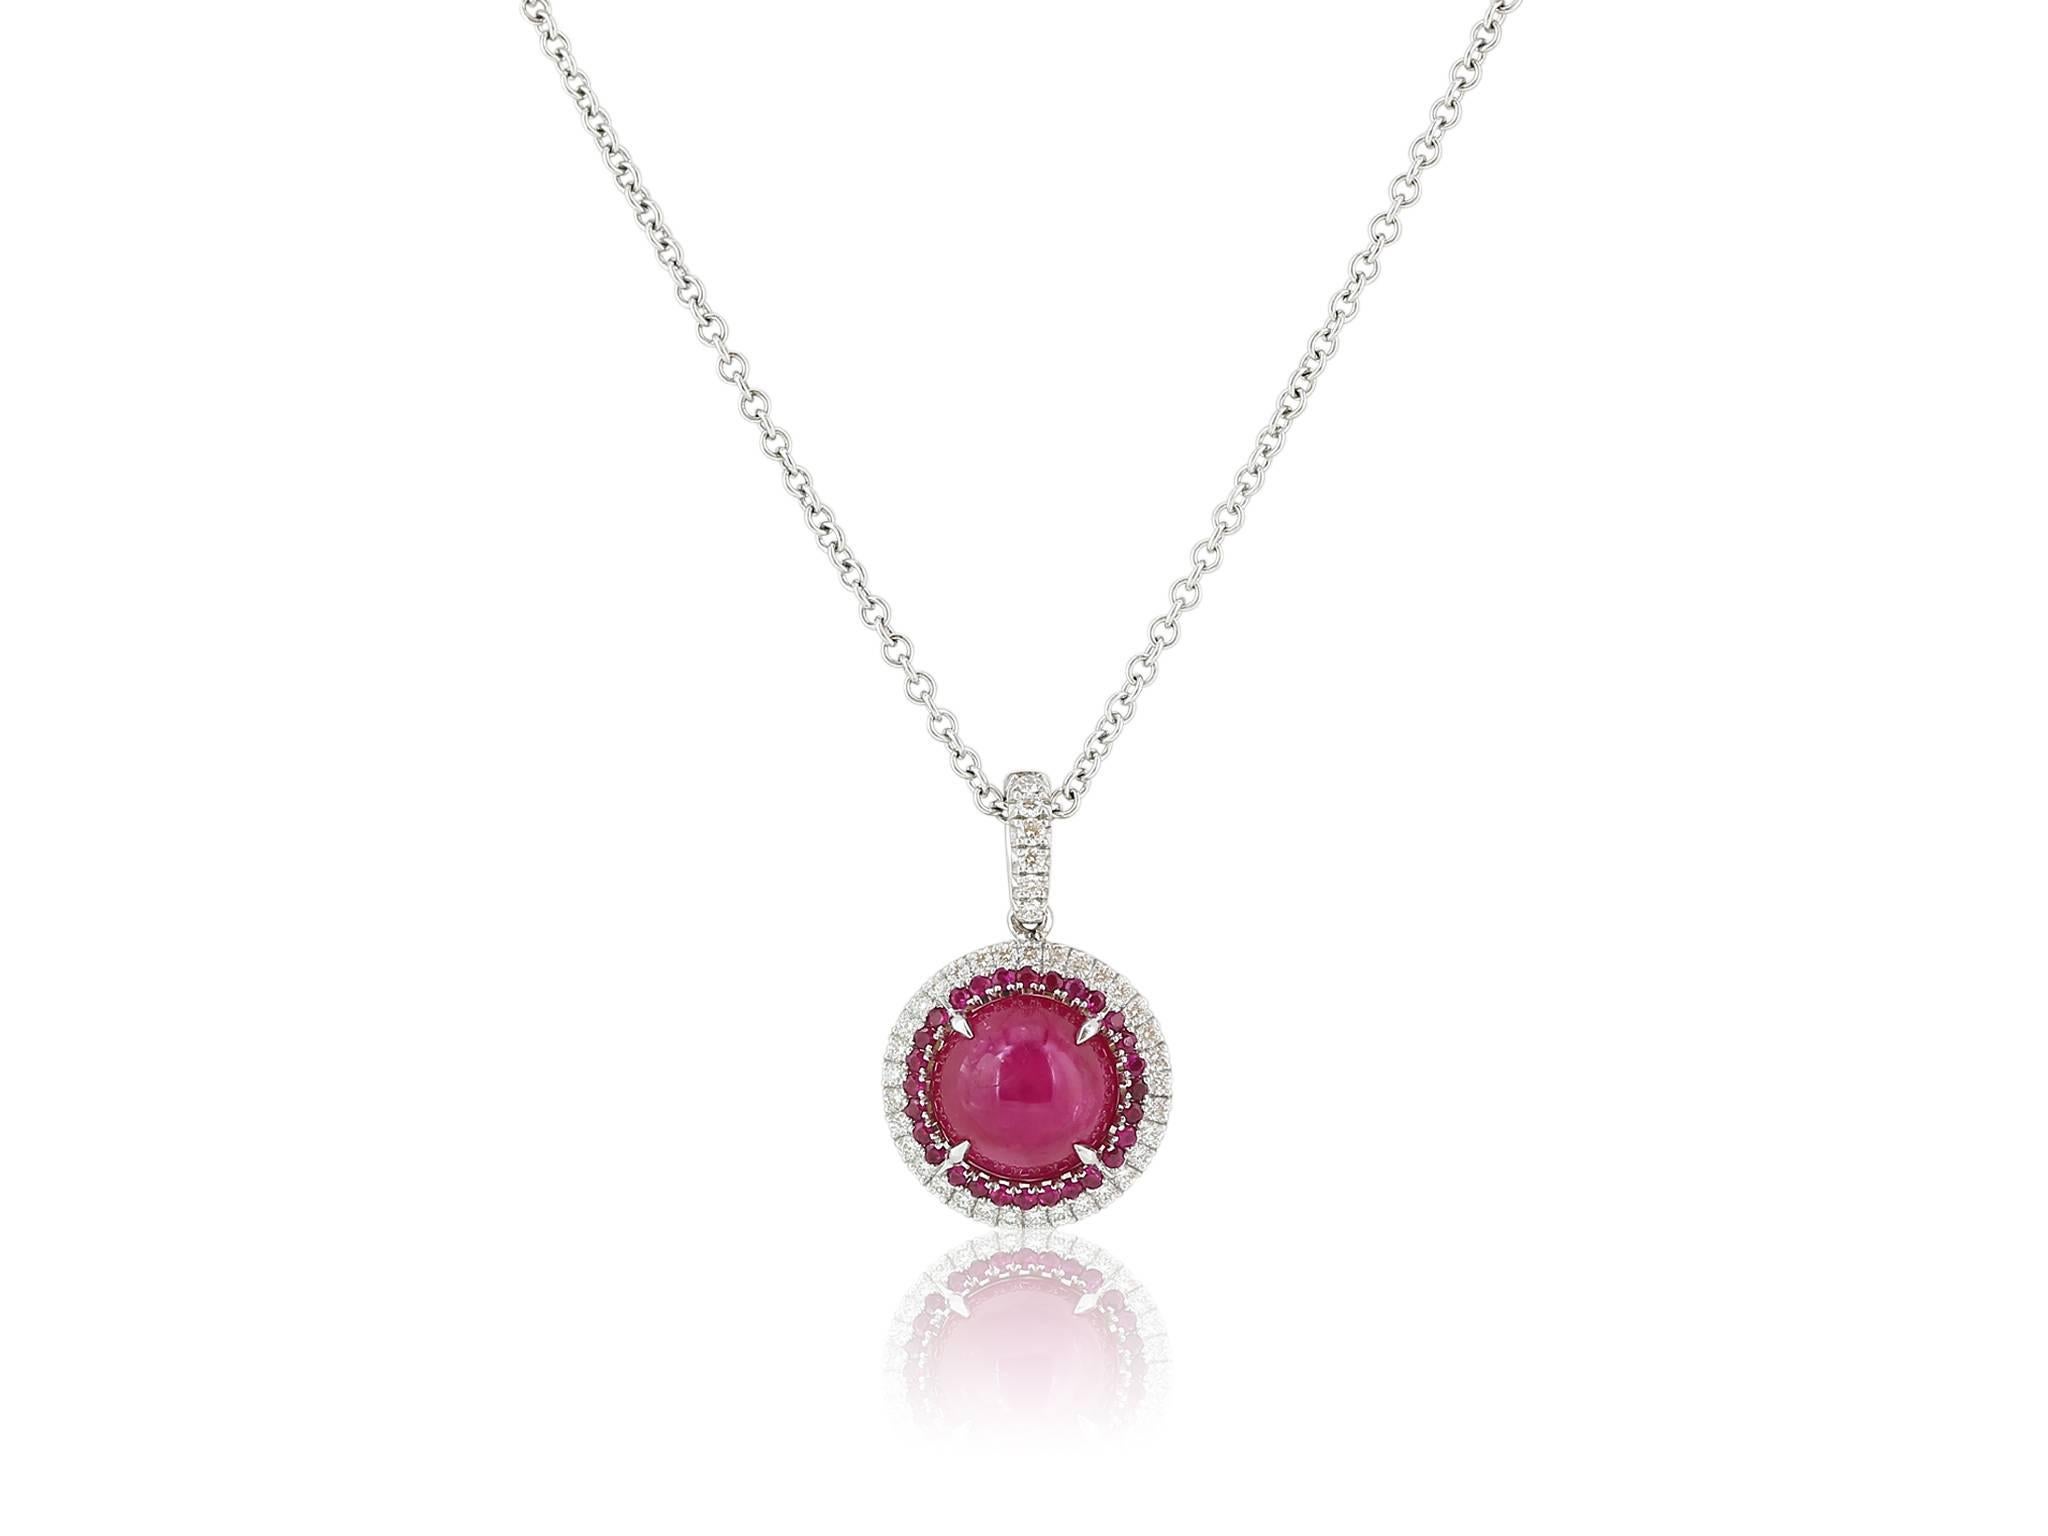 18 karat white gold pendant consisting of one round cabochon Burmese ruby weighing 4.12 carats surrounded by round rubies weighing .19 carats with a double halo and bail accented with round brilliant diamonds weighing .24 carats with a color and